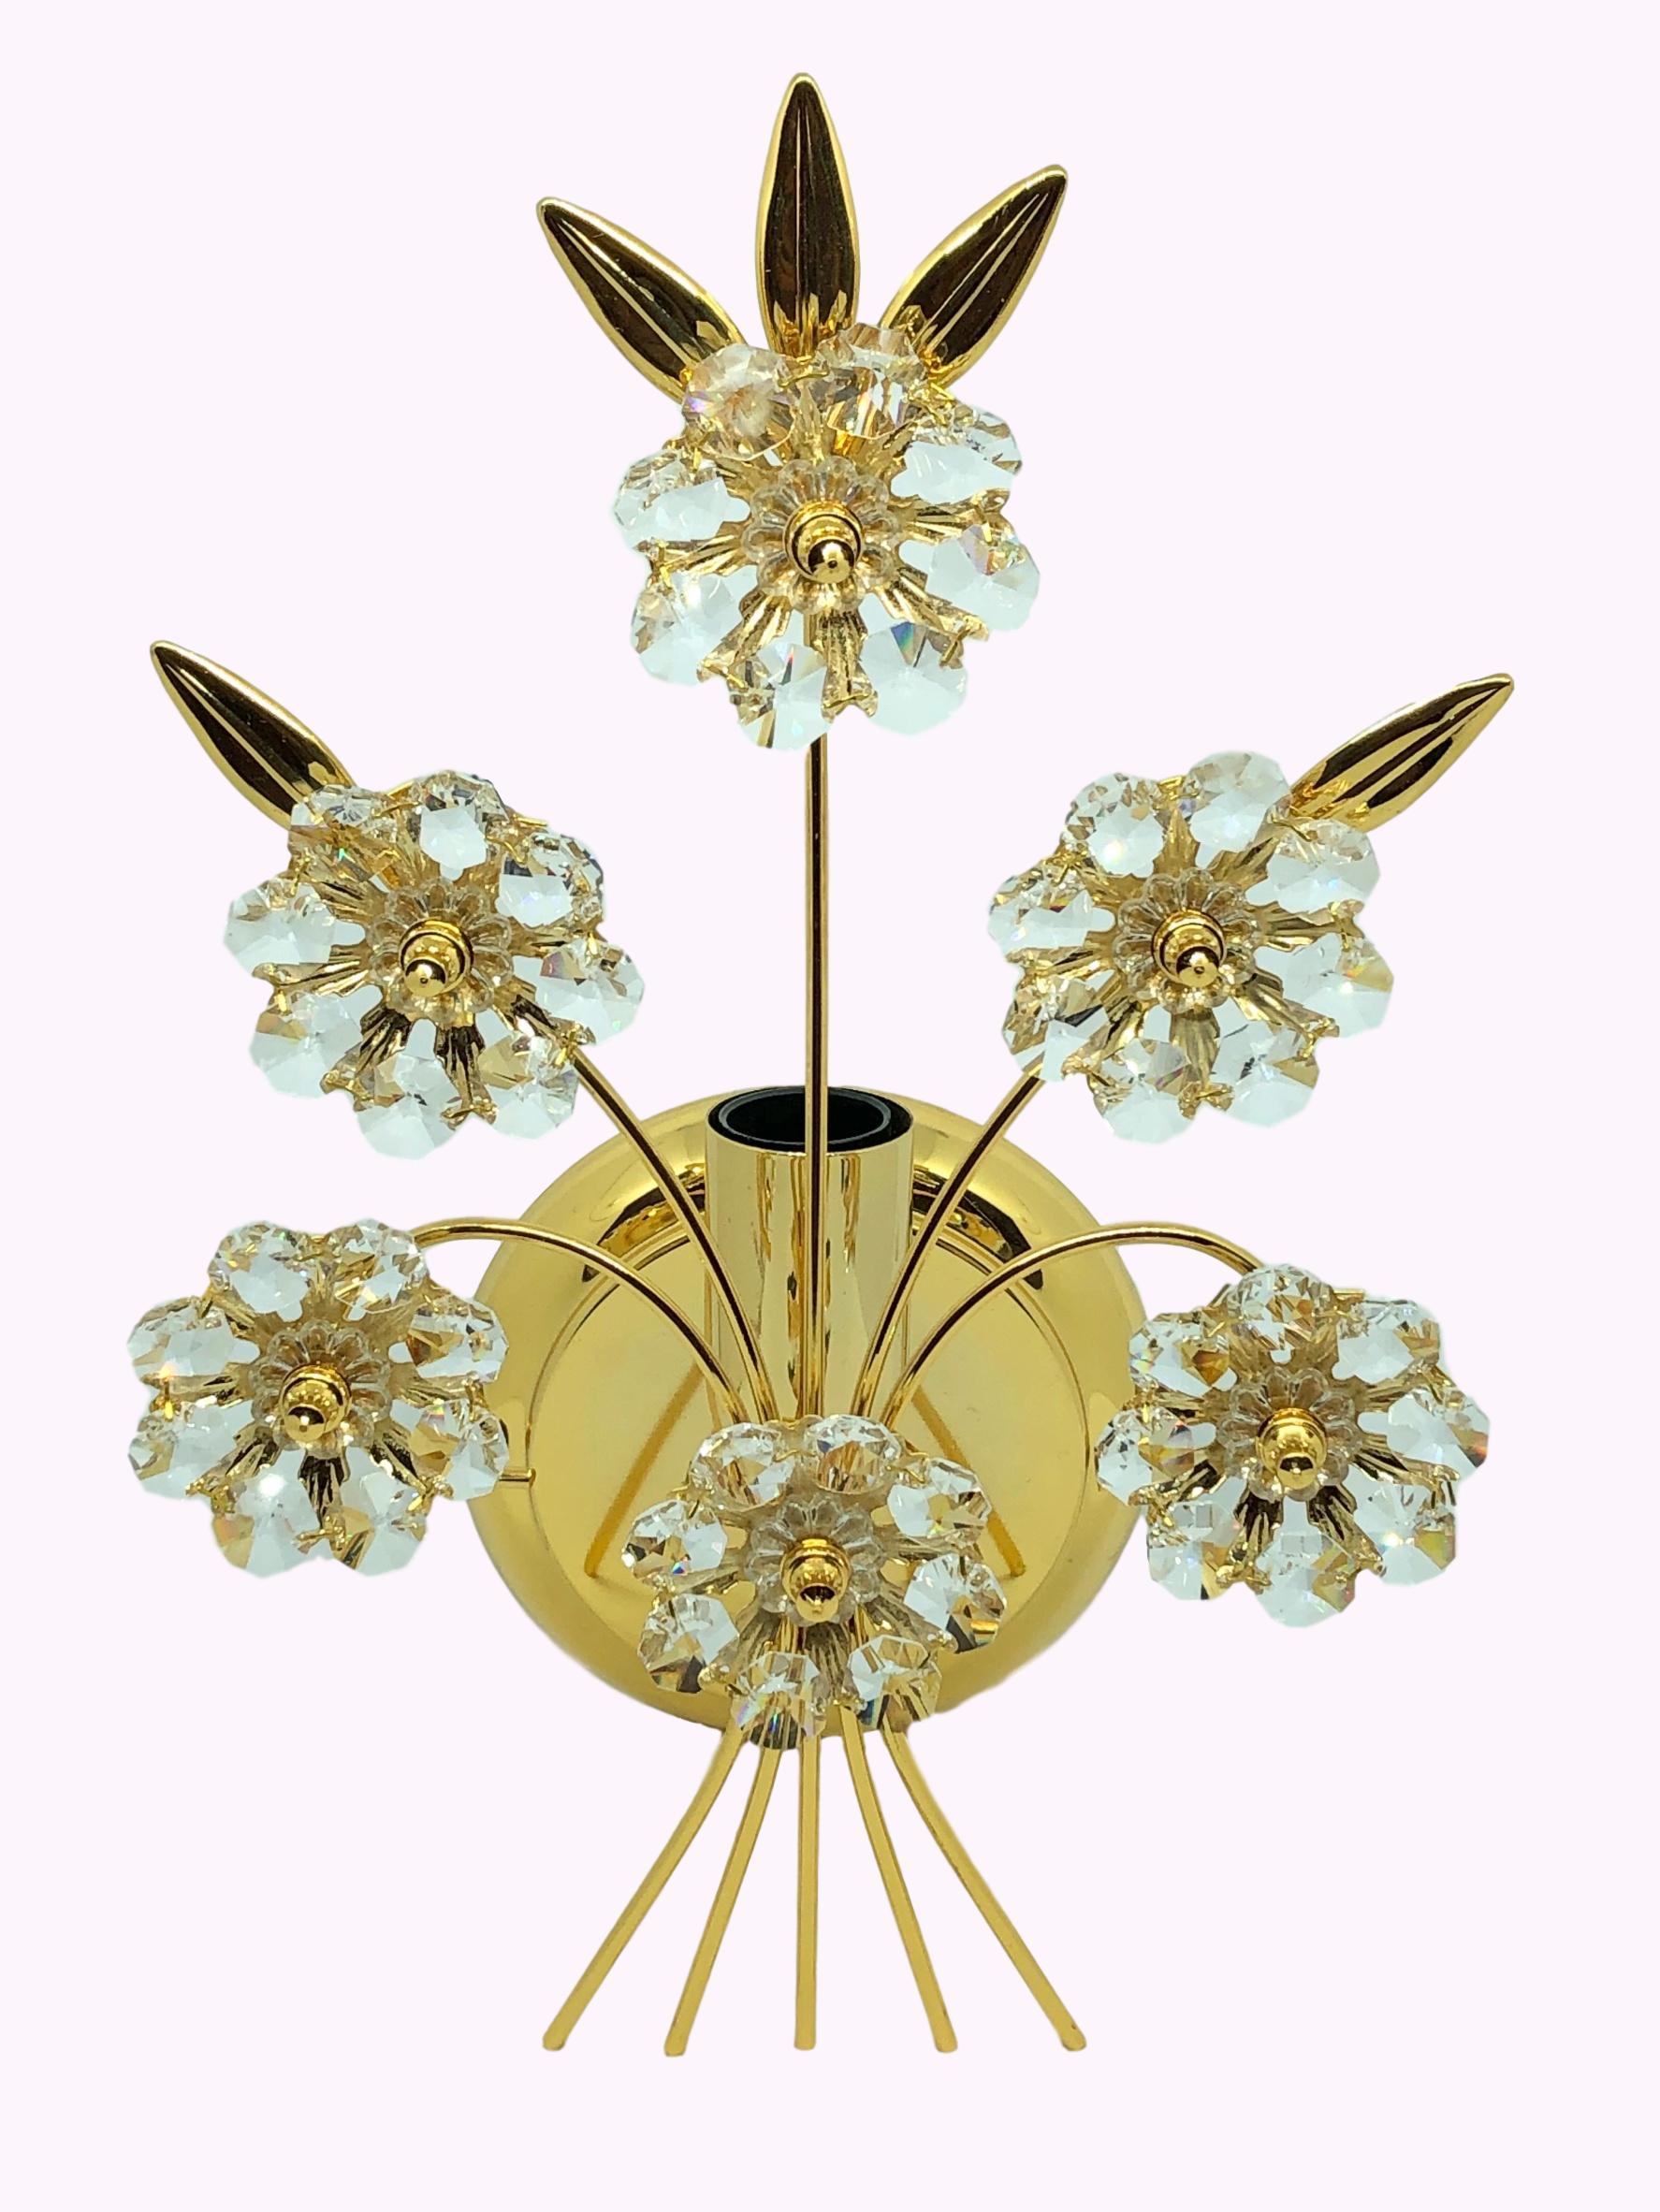 A single vintage gold-plated sconce with faceted crystal flowers made by the German company Palwa. The fixture has one European style E14 socket. It requires a European E14 candelabra bulb, up to 40 Watt.